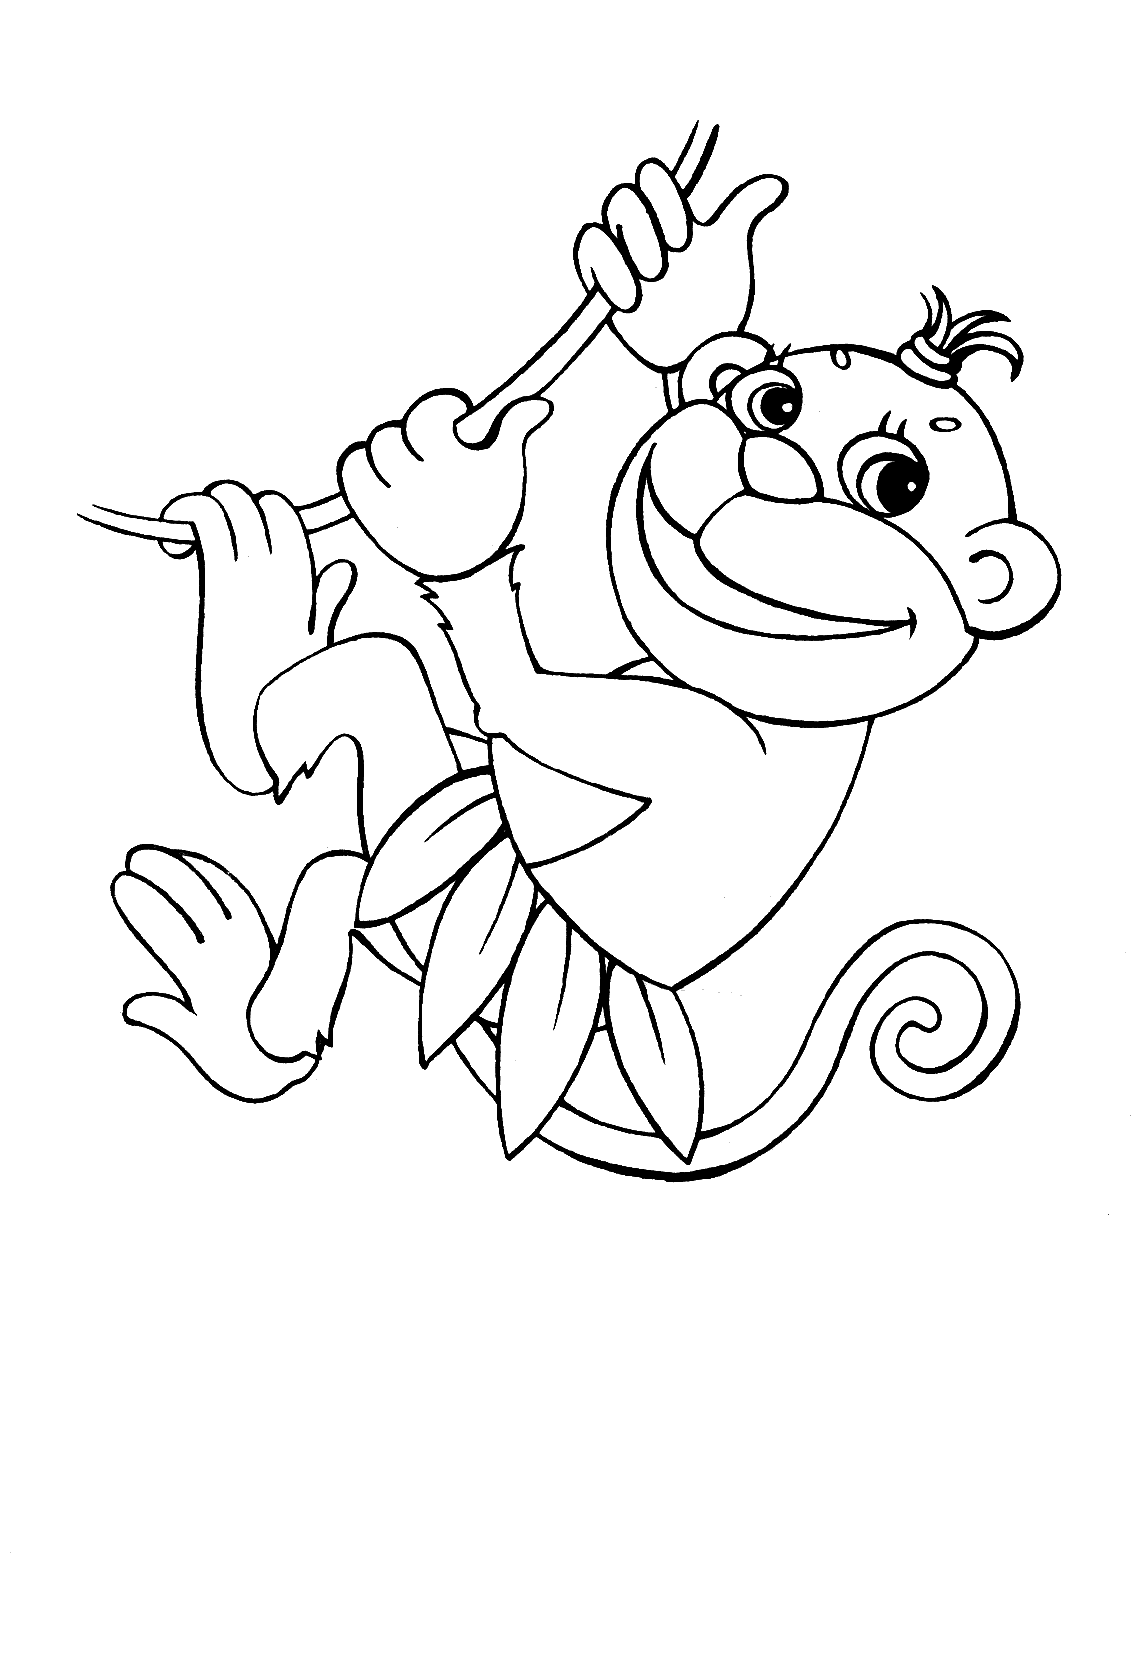 Cute Baby Monkey Coloring Page